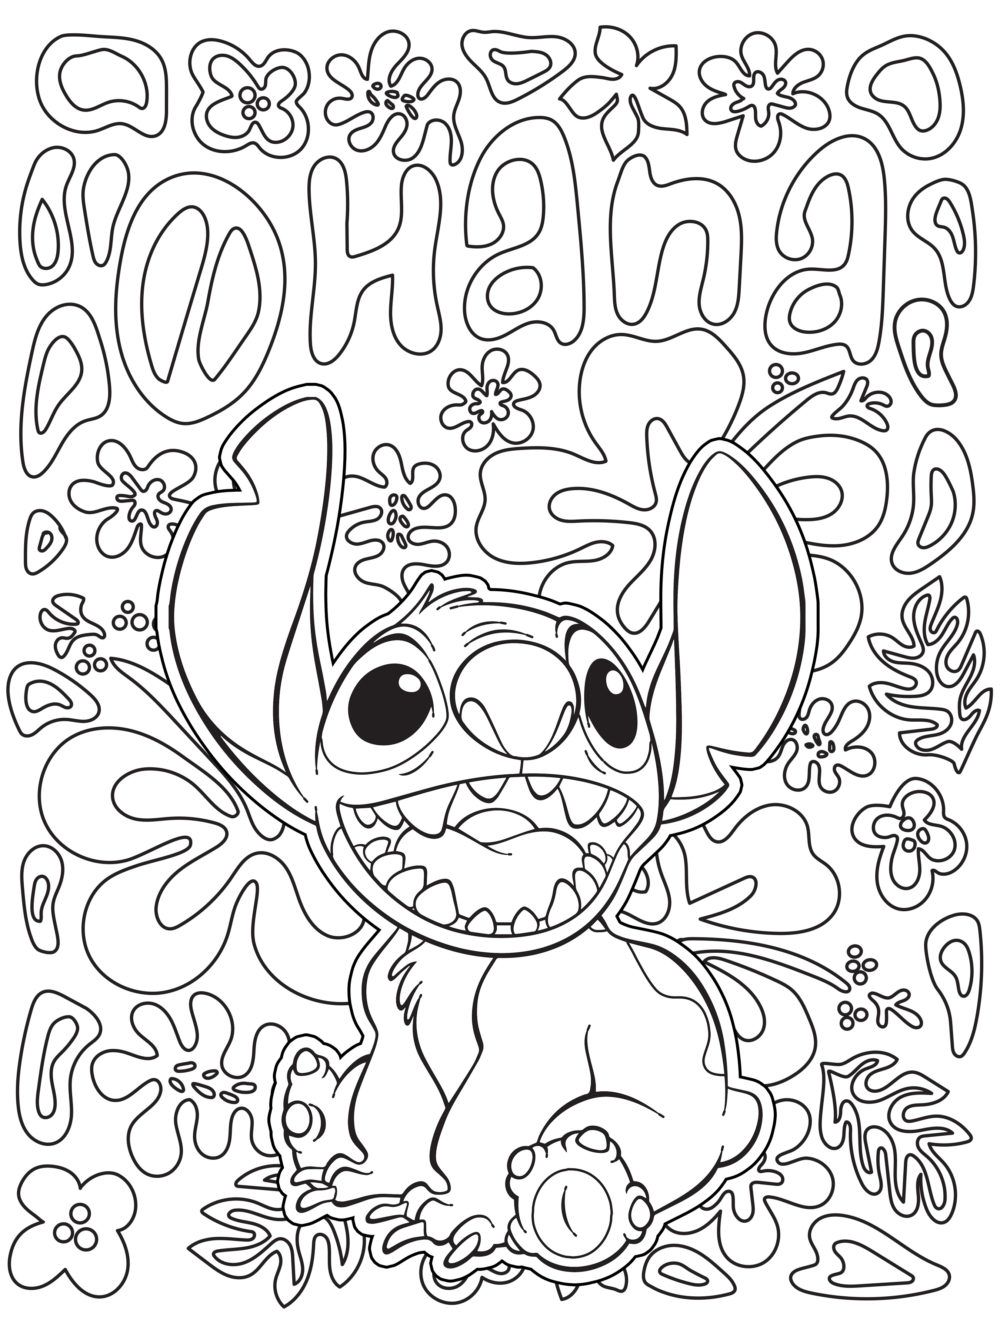 Download 25 Printable Disney Coloring Sheets So You Can Finally Have A Few Minutes Of Quiet In Your House The Disney Food Blog